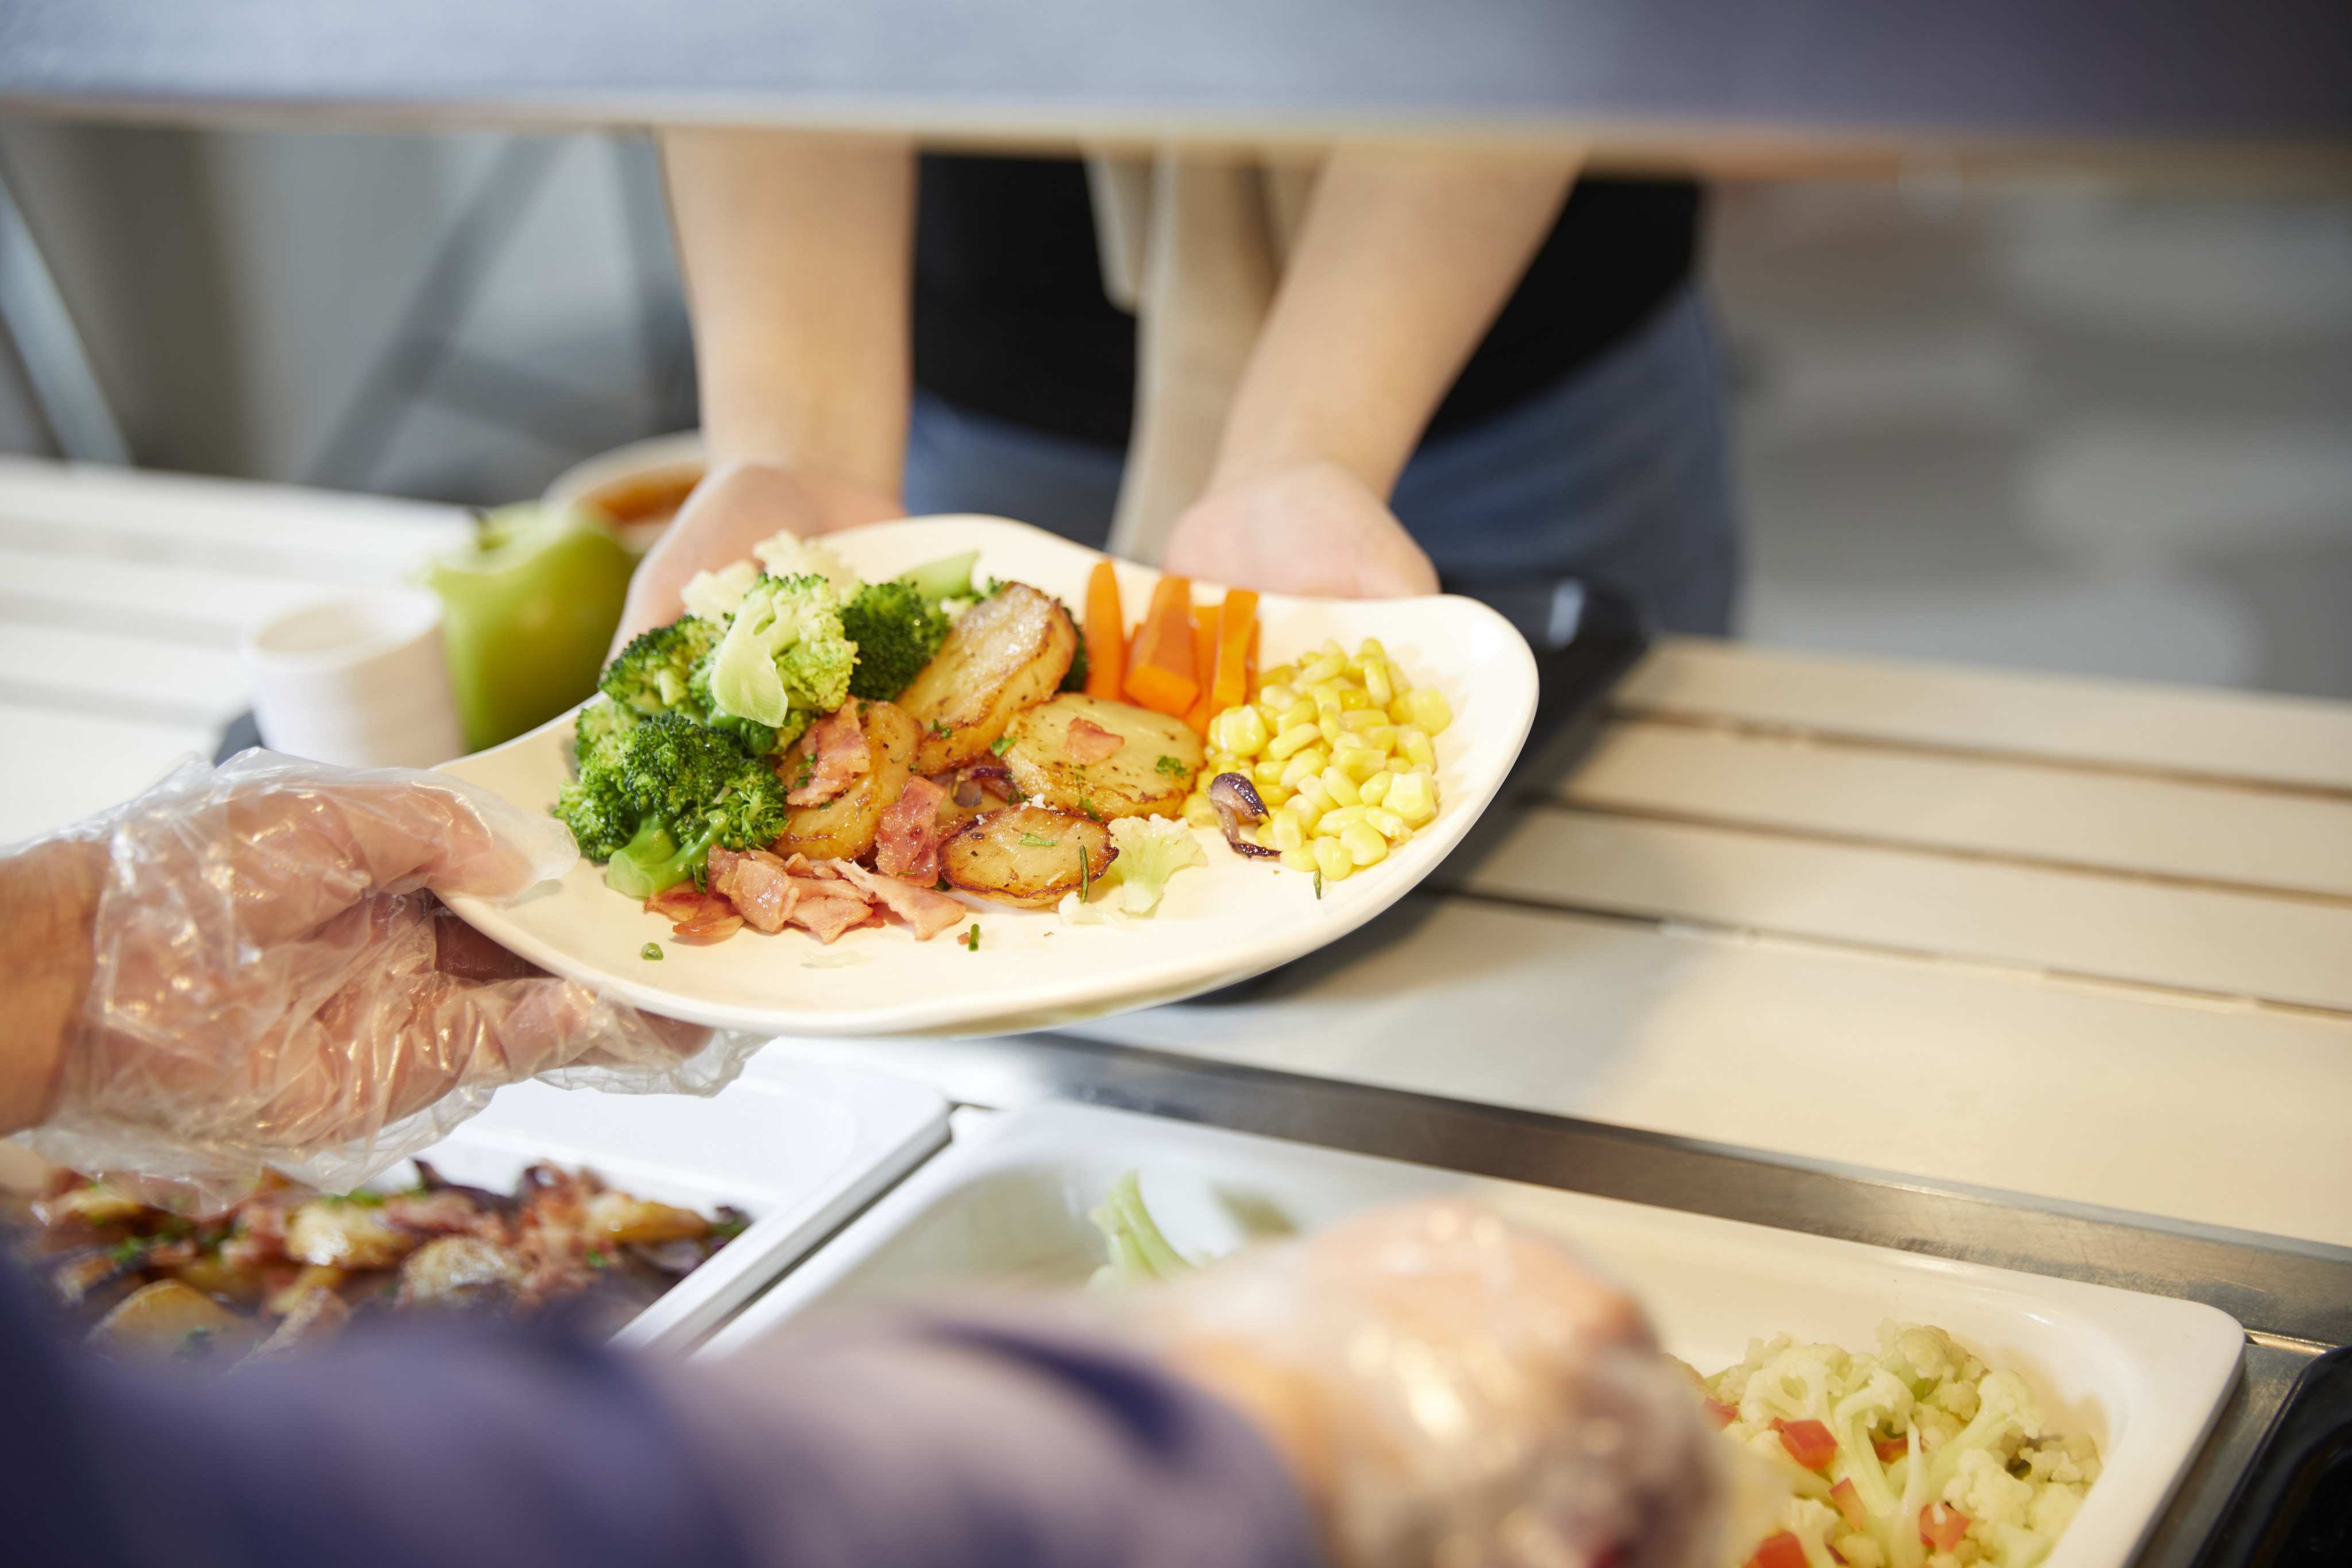 Making school meals sustainable is a challenge in Hong Kong, with the need to import many ingredients. But education may help students make more responsible food choices. Photo: Sodexo